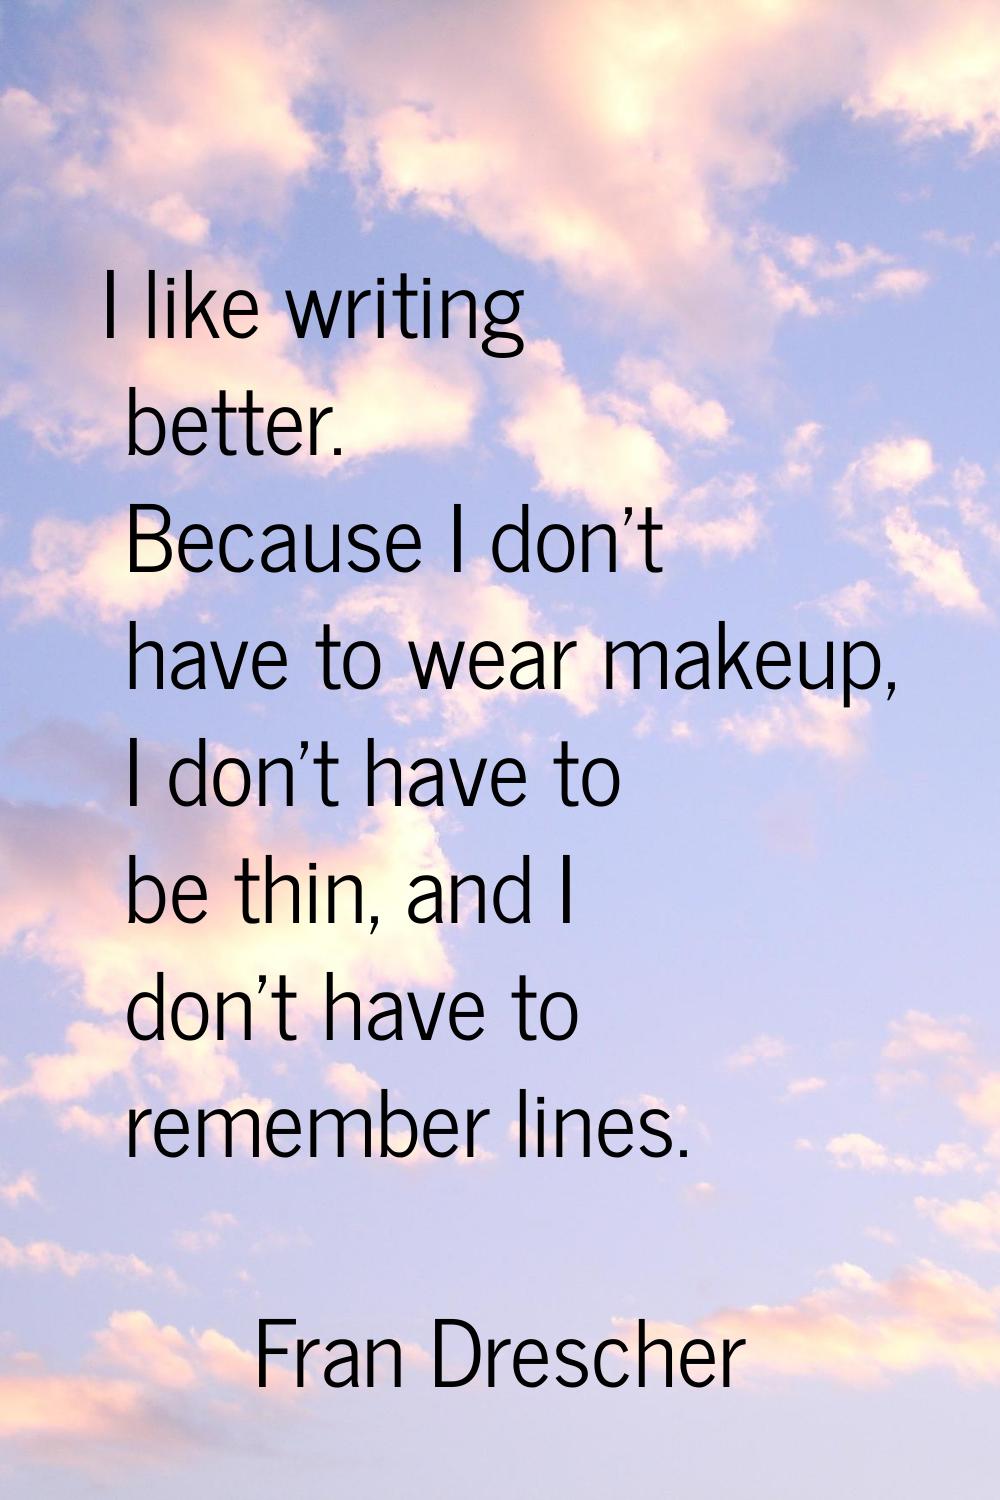 I like writing better. Because I don't have to wear makeup, I don't have to be thin, and I don't ha